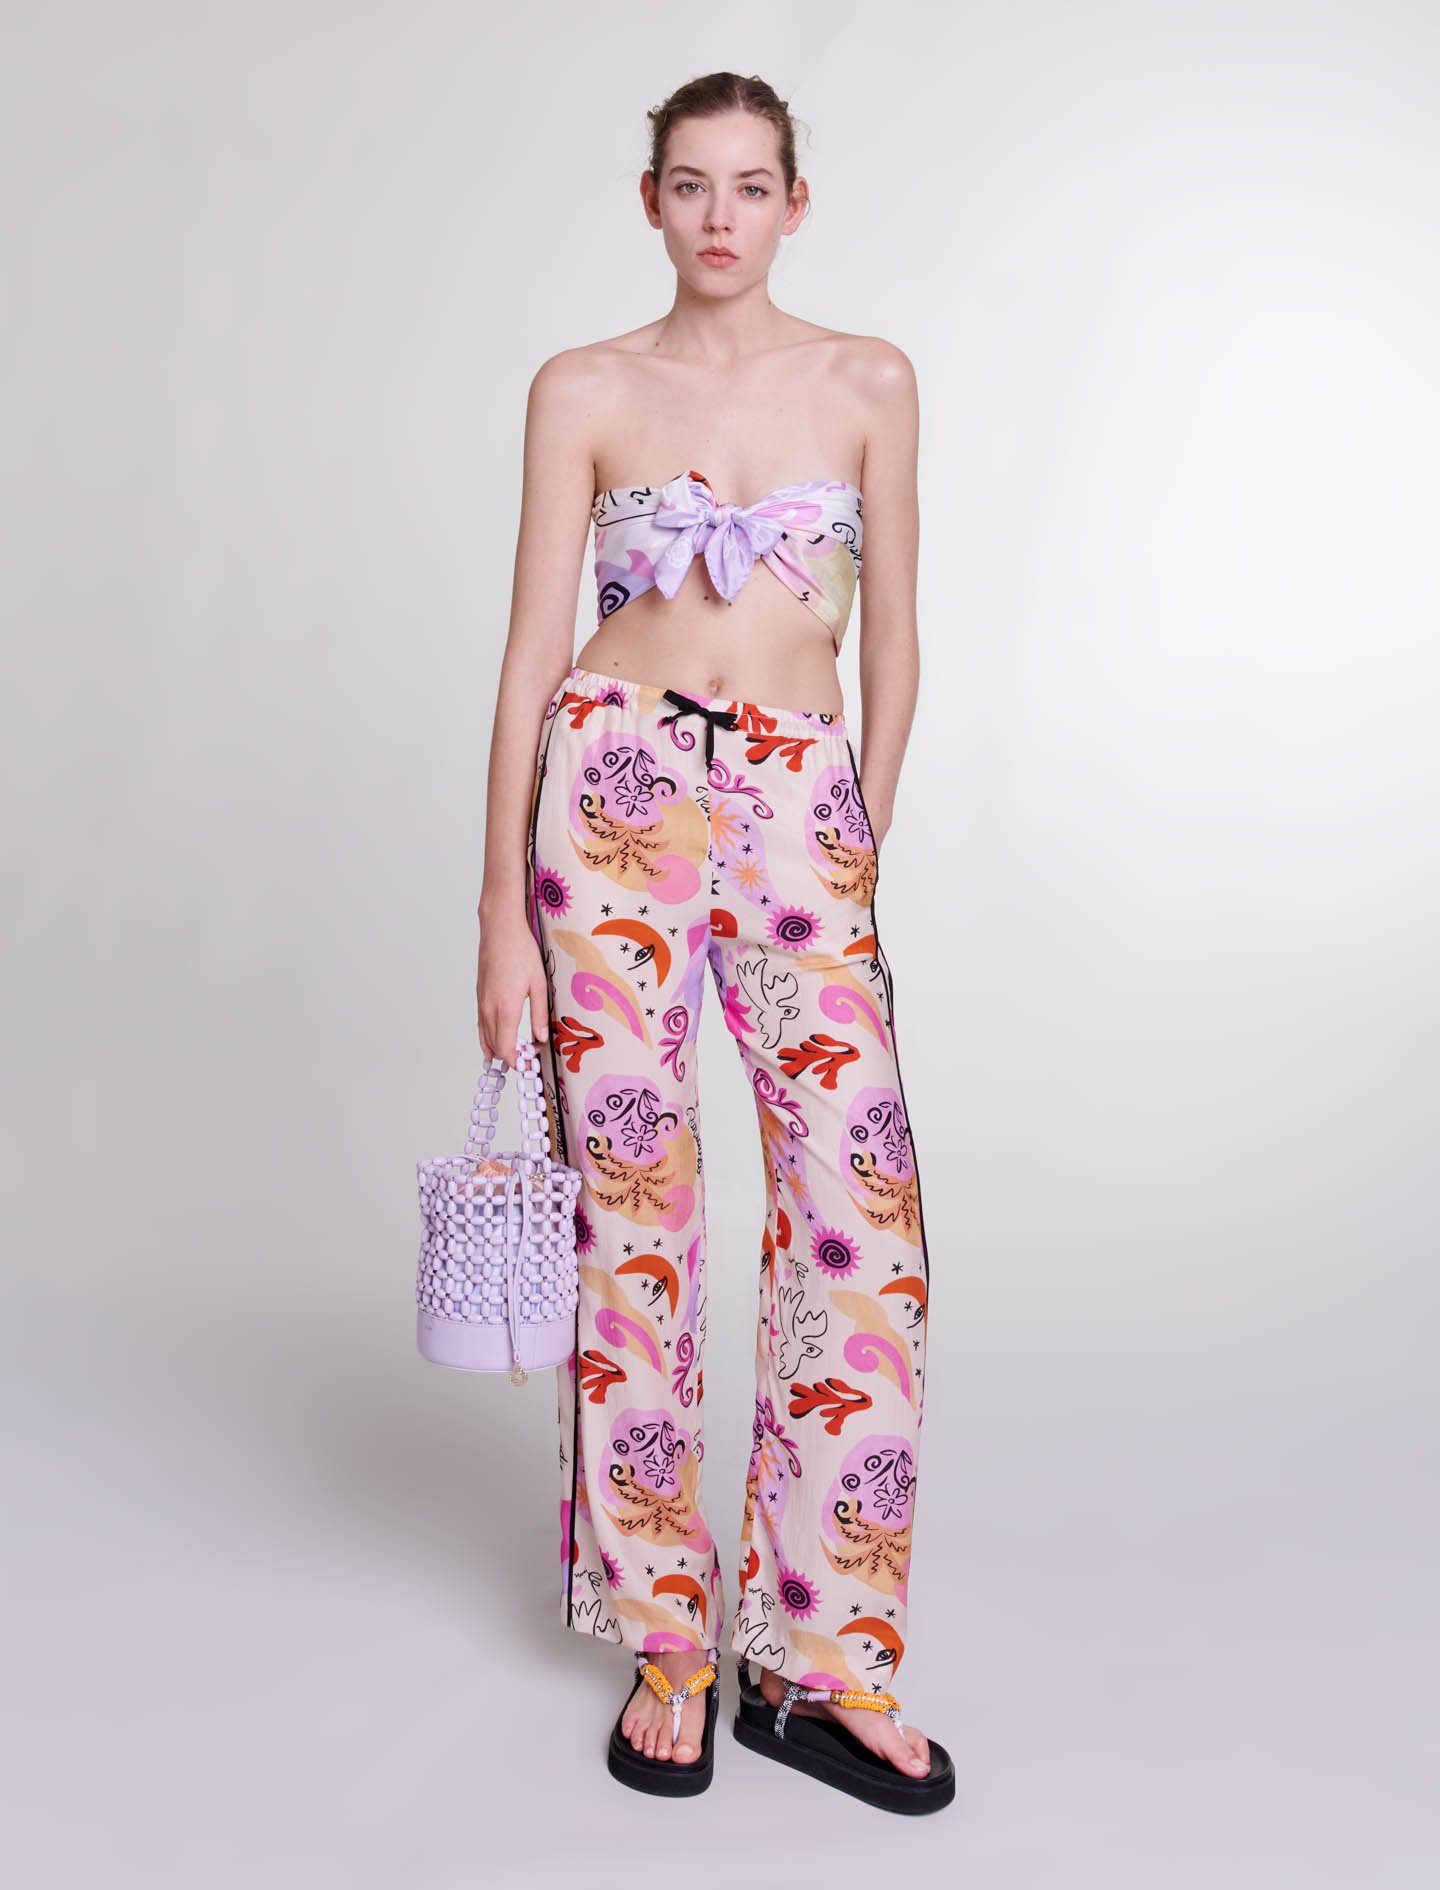 Maje Woman's silk Piping: Silk trousers for Spring/Summer, in color Print paradisio /